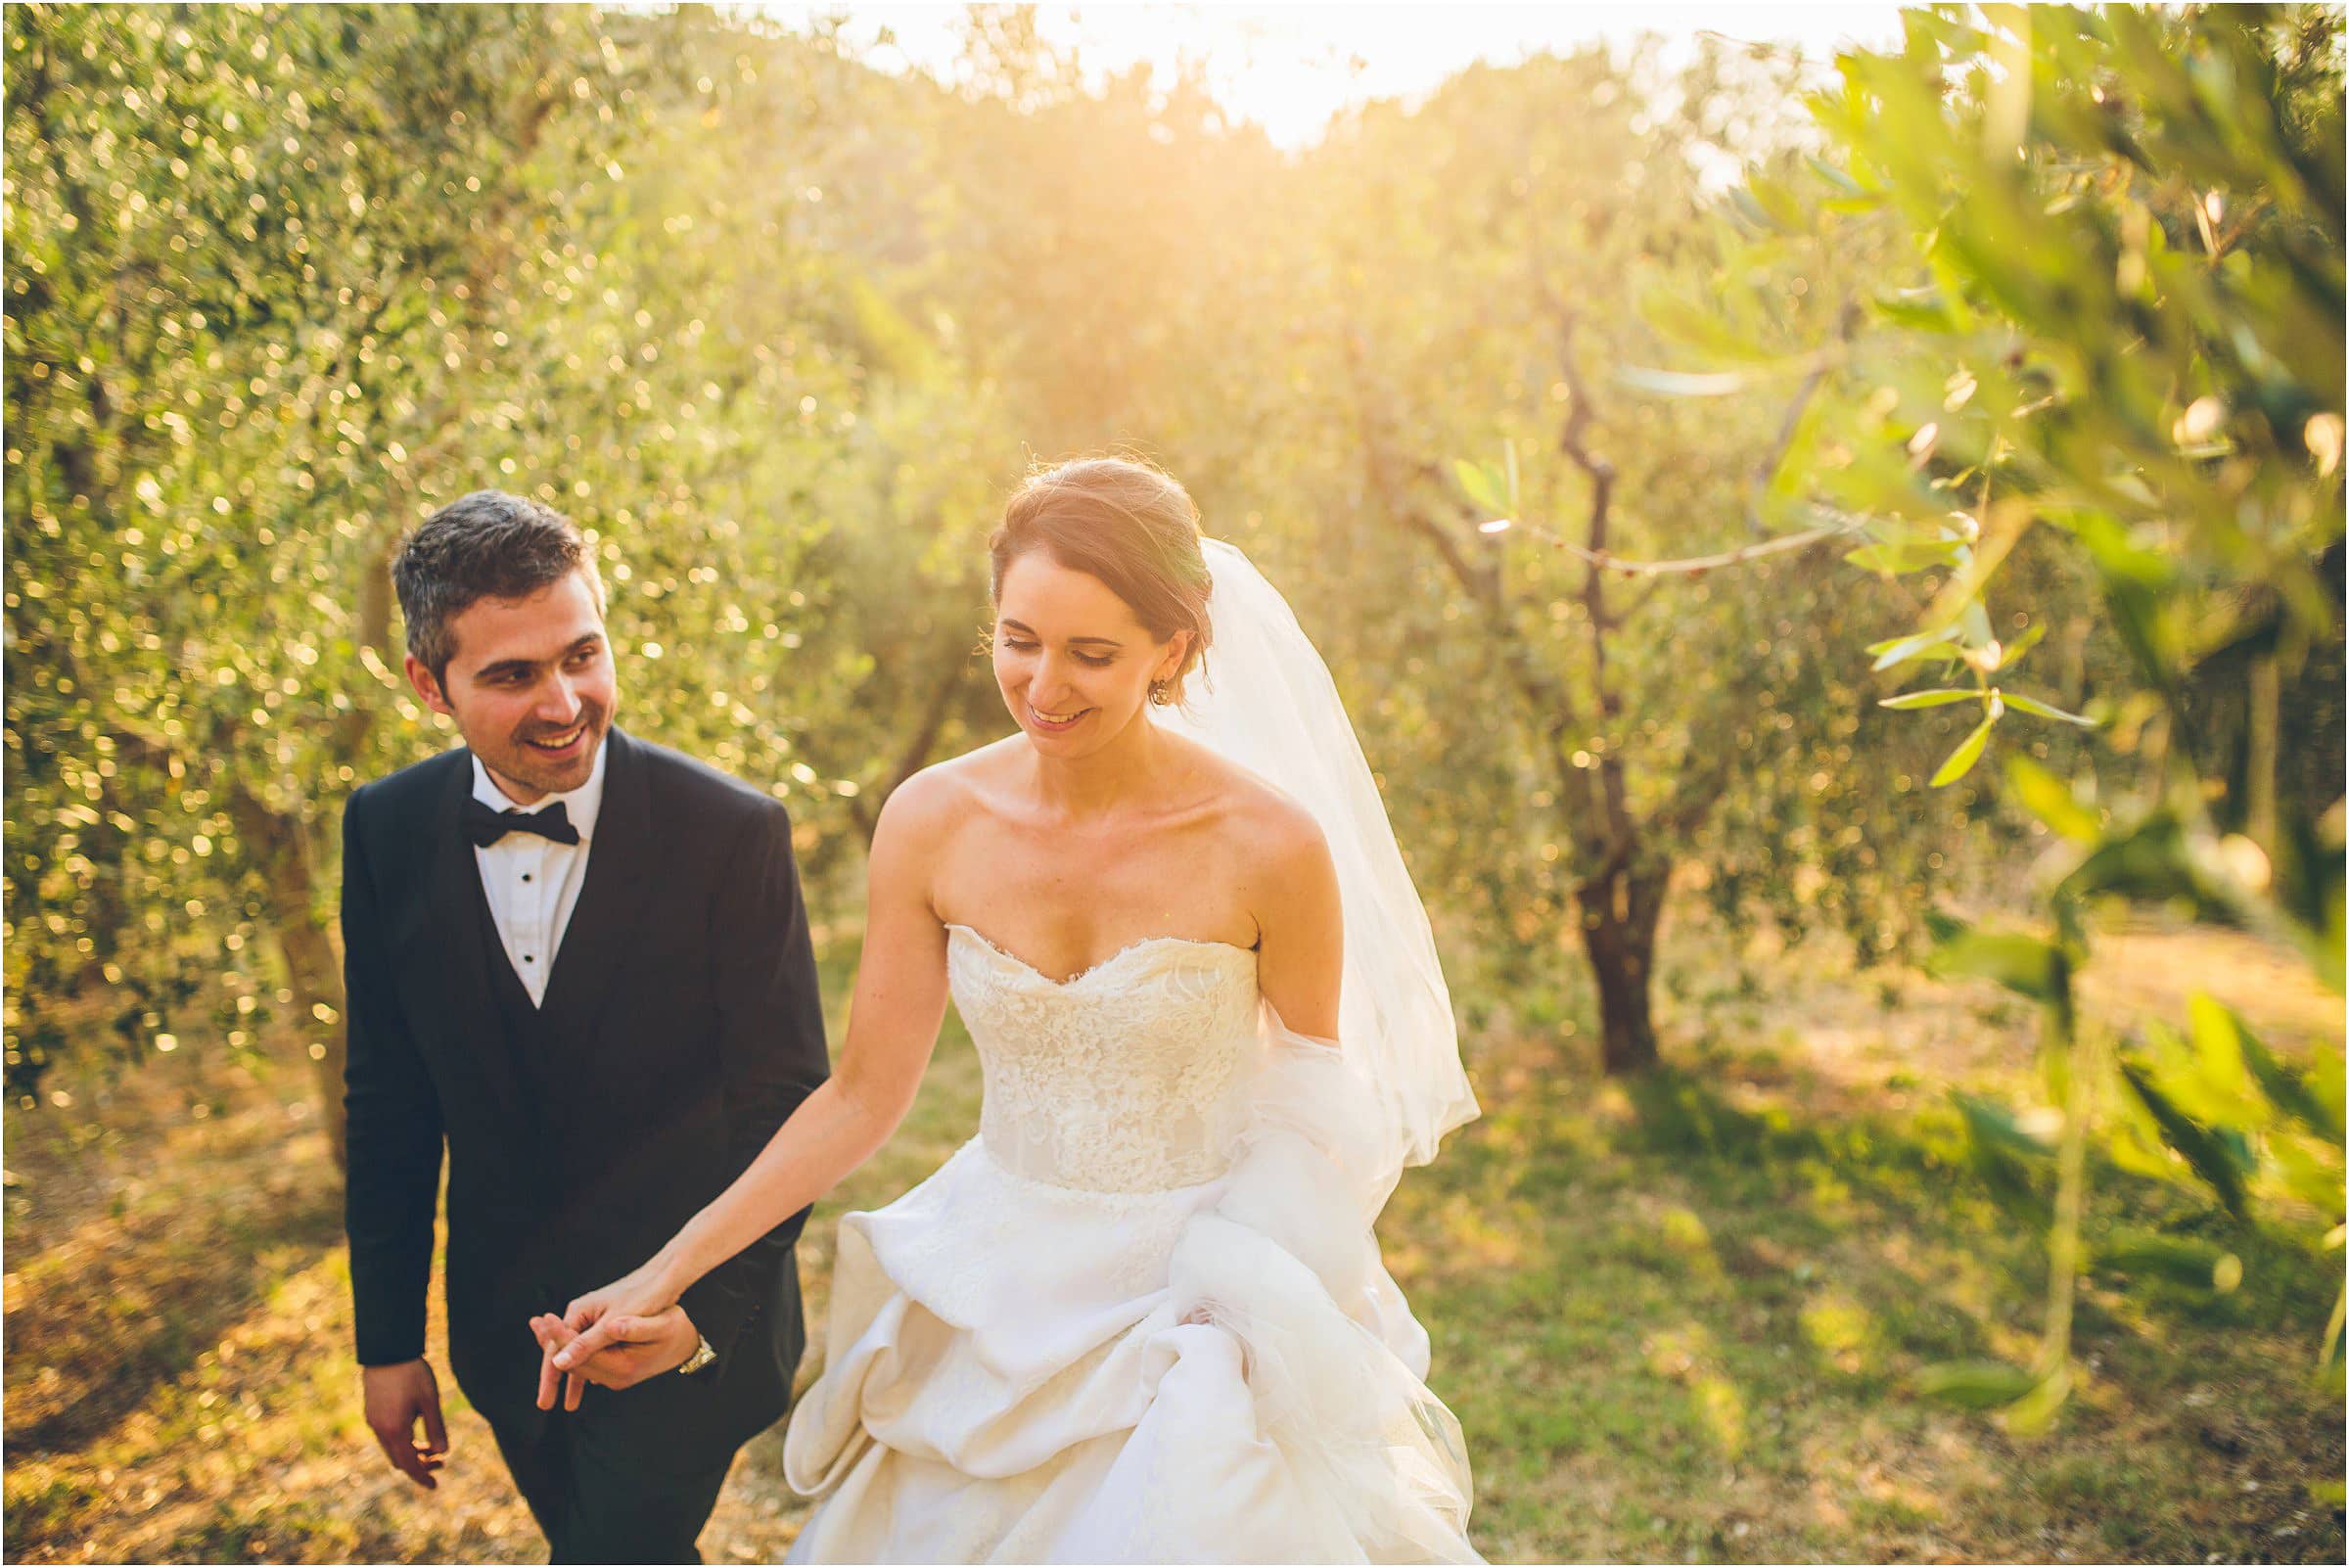 The happy couple hold hands and walk through the trees at Castello di Vicarello in Tuscany